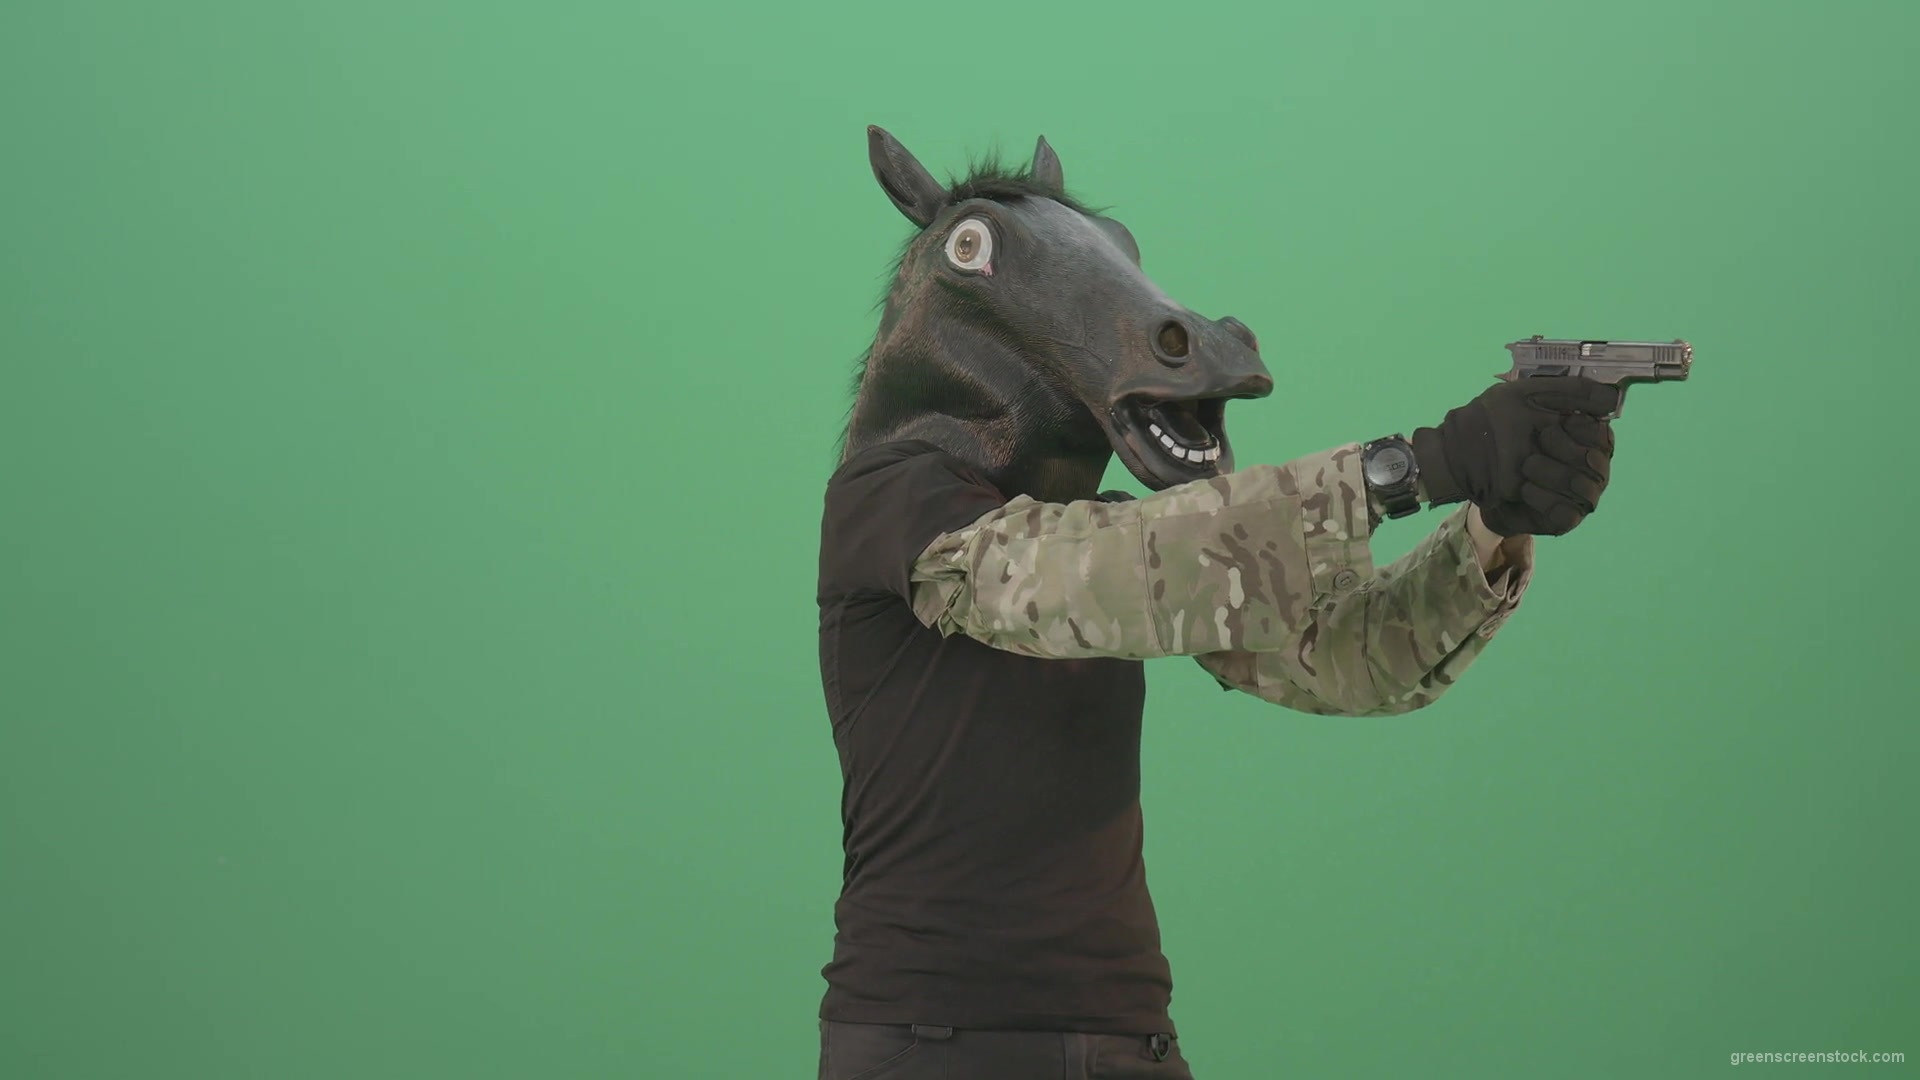 Funny-Horse-Man-in-Mask-shooting-enemies-isolated-on-green-screen-4K-Video-Footage-1920_008 Green Screen Stock